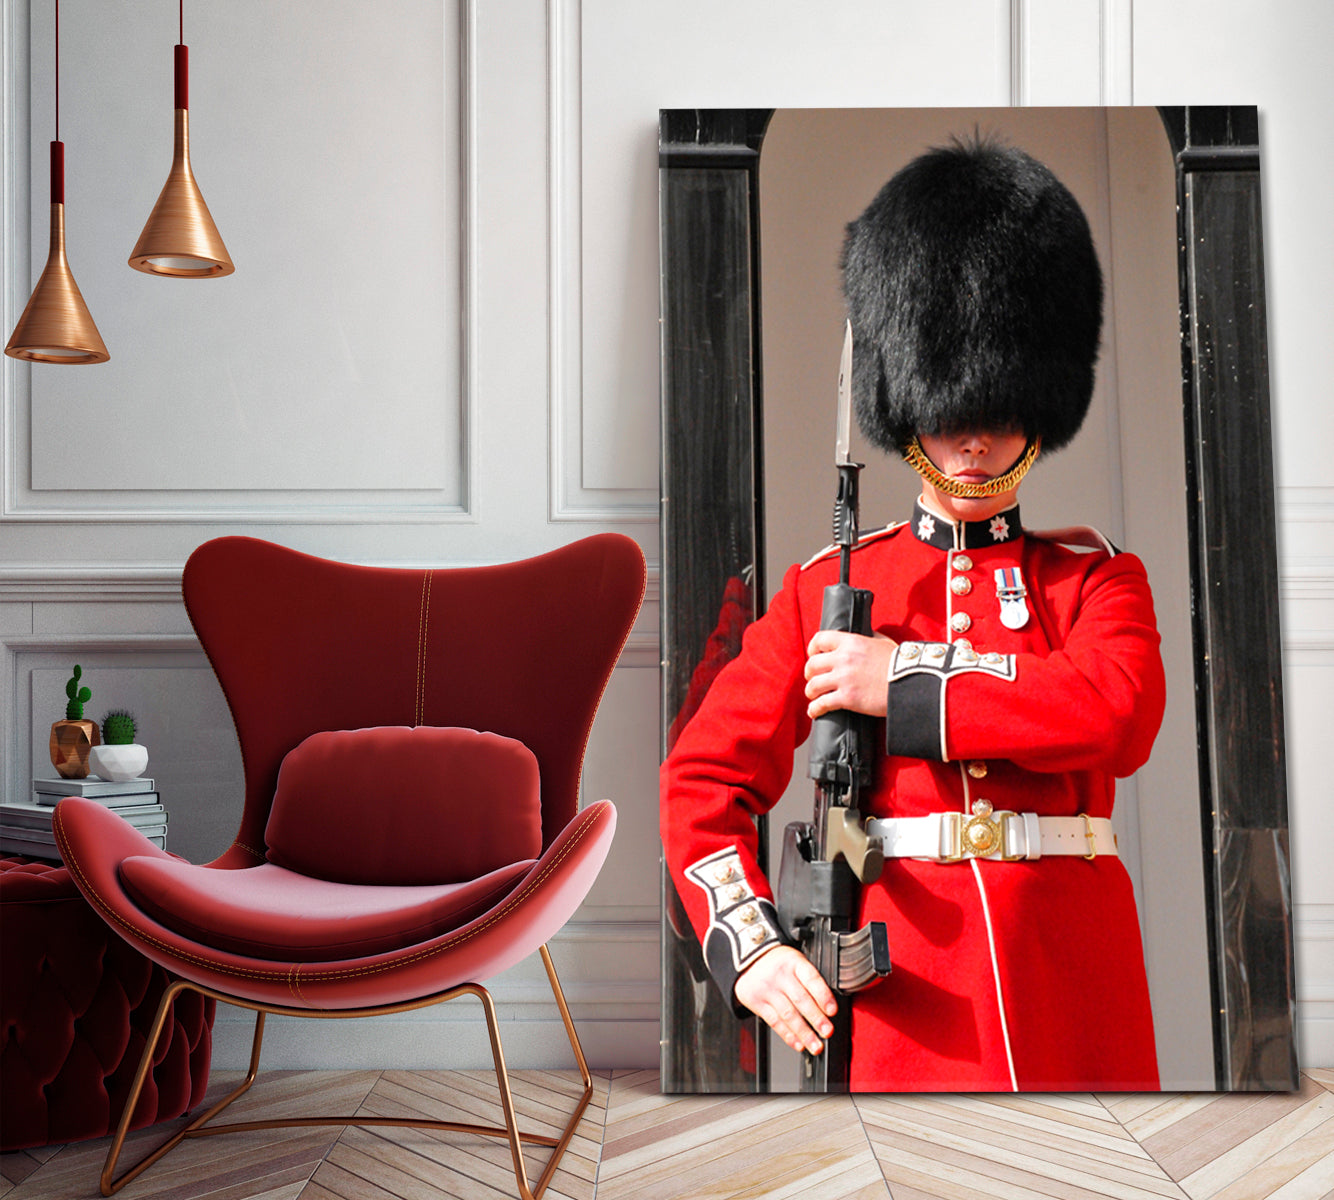 LONDON ENGLAND Soldier Official Royal Residences Queen's Guard Tower Canvas Print - Vertical panel Traveling Around Ink Canvas Print Artesty   